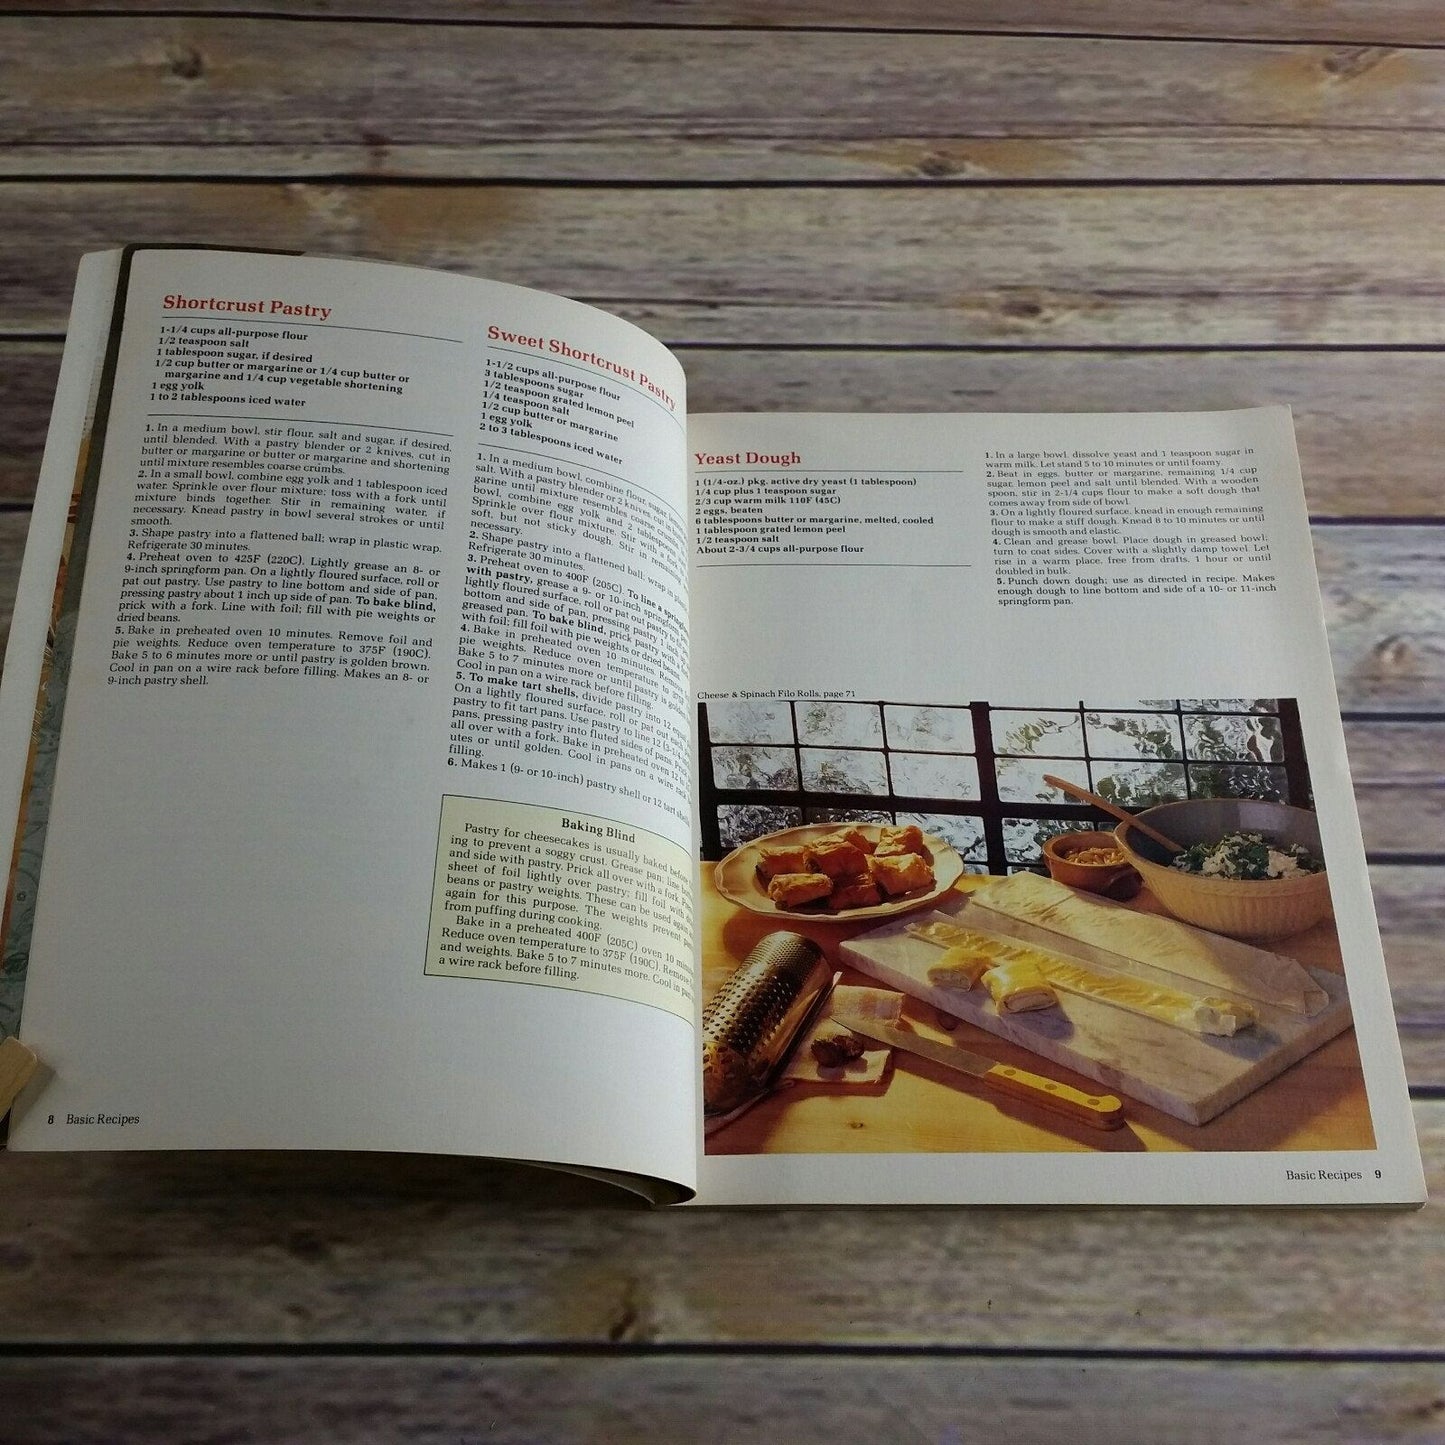 Vintage Cheesecakes Cookbook Recipes HP Books 1985 Barbara Maher Softcover Color Photos Cheesecakes Sweet and Savory Paperback